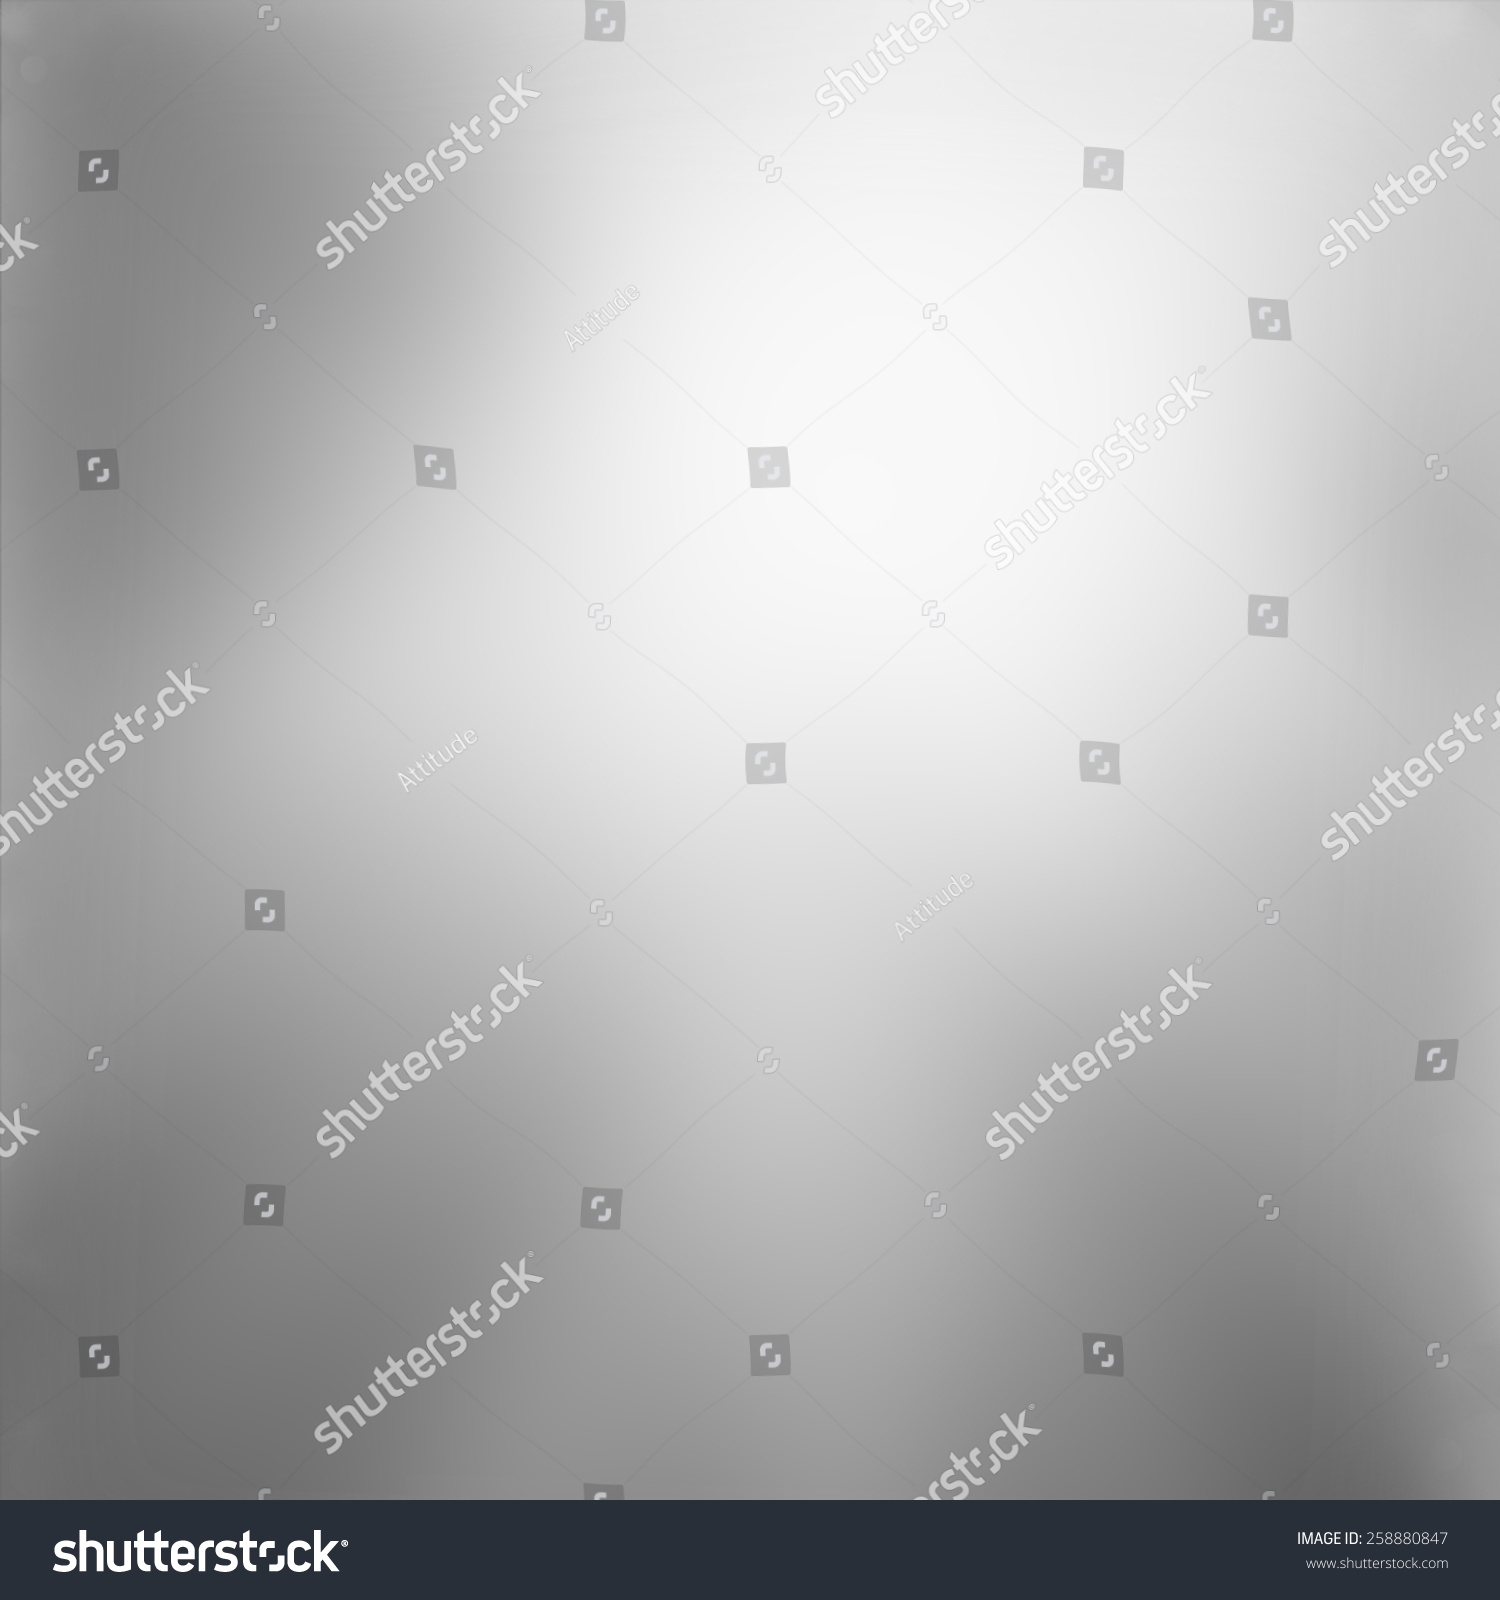 Abstract Shiny Silver Gray Background Smooth Stock Illustration ...